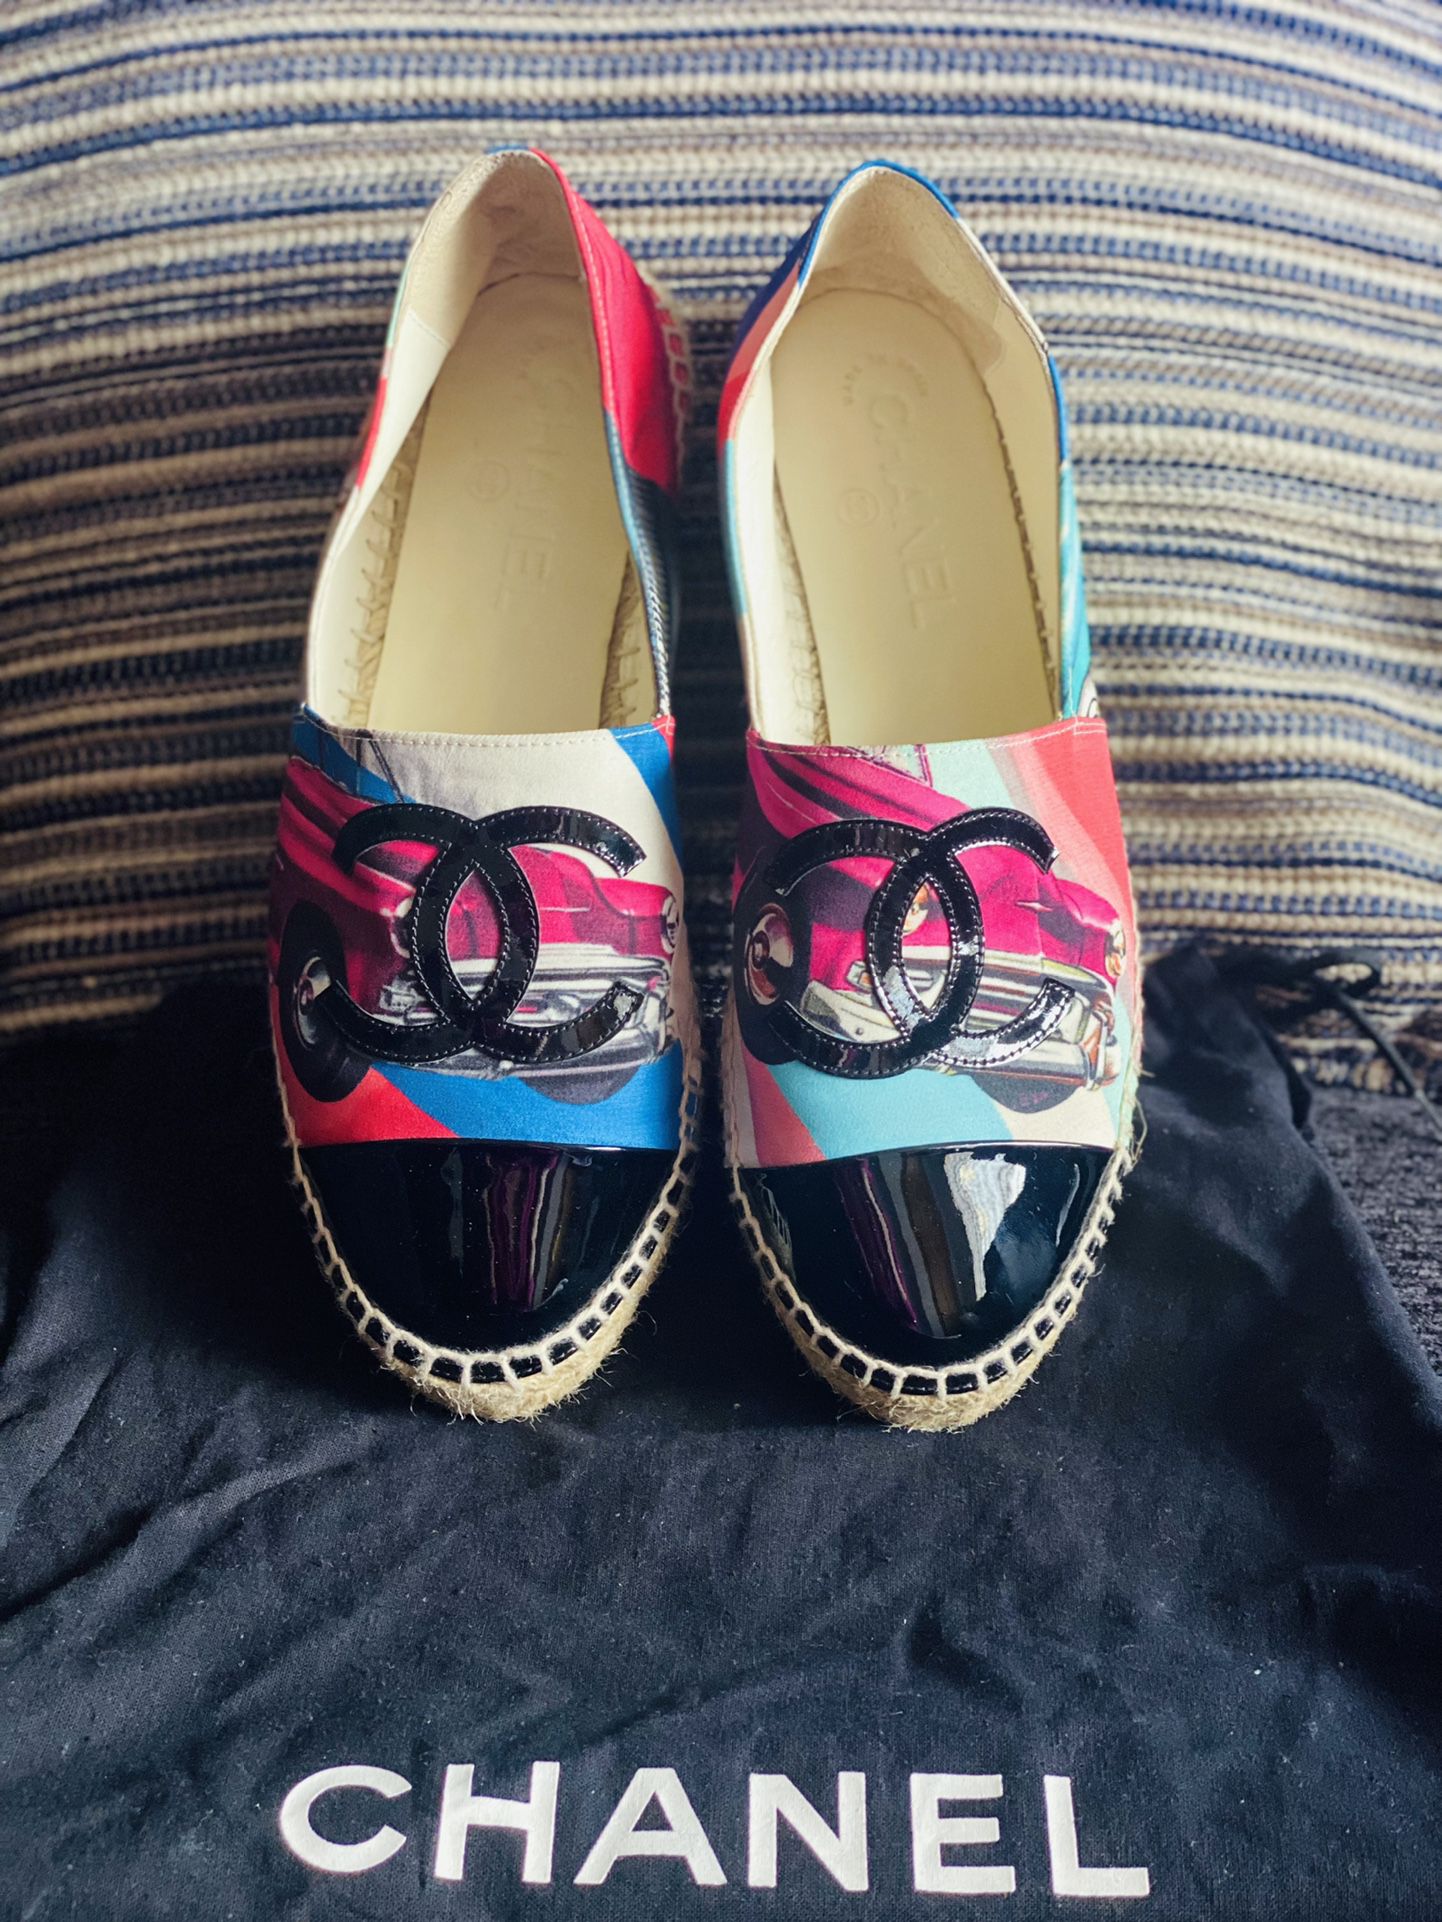 Authentic Chanel espadrilles 38 Give Me An Offer ! for Sale in